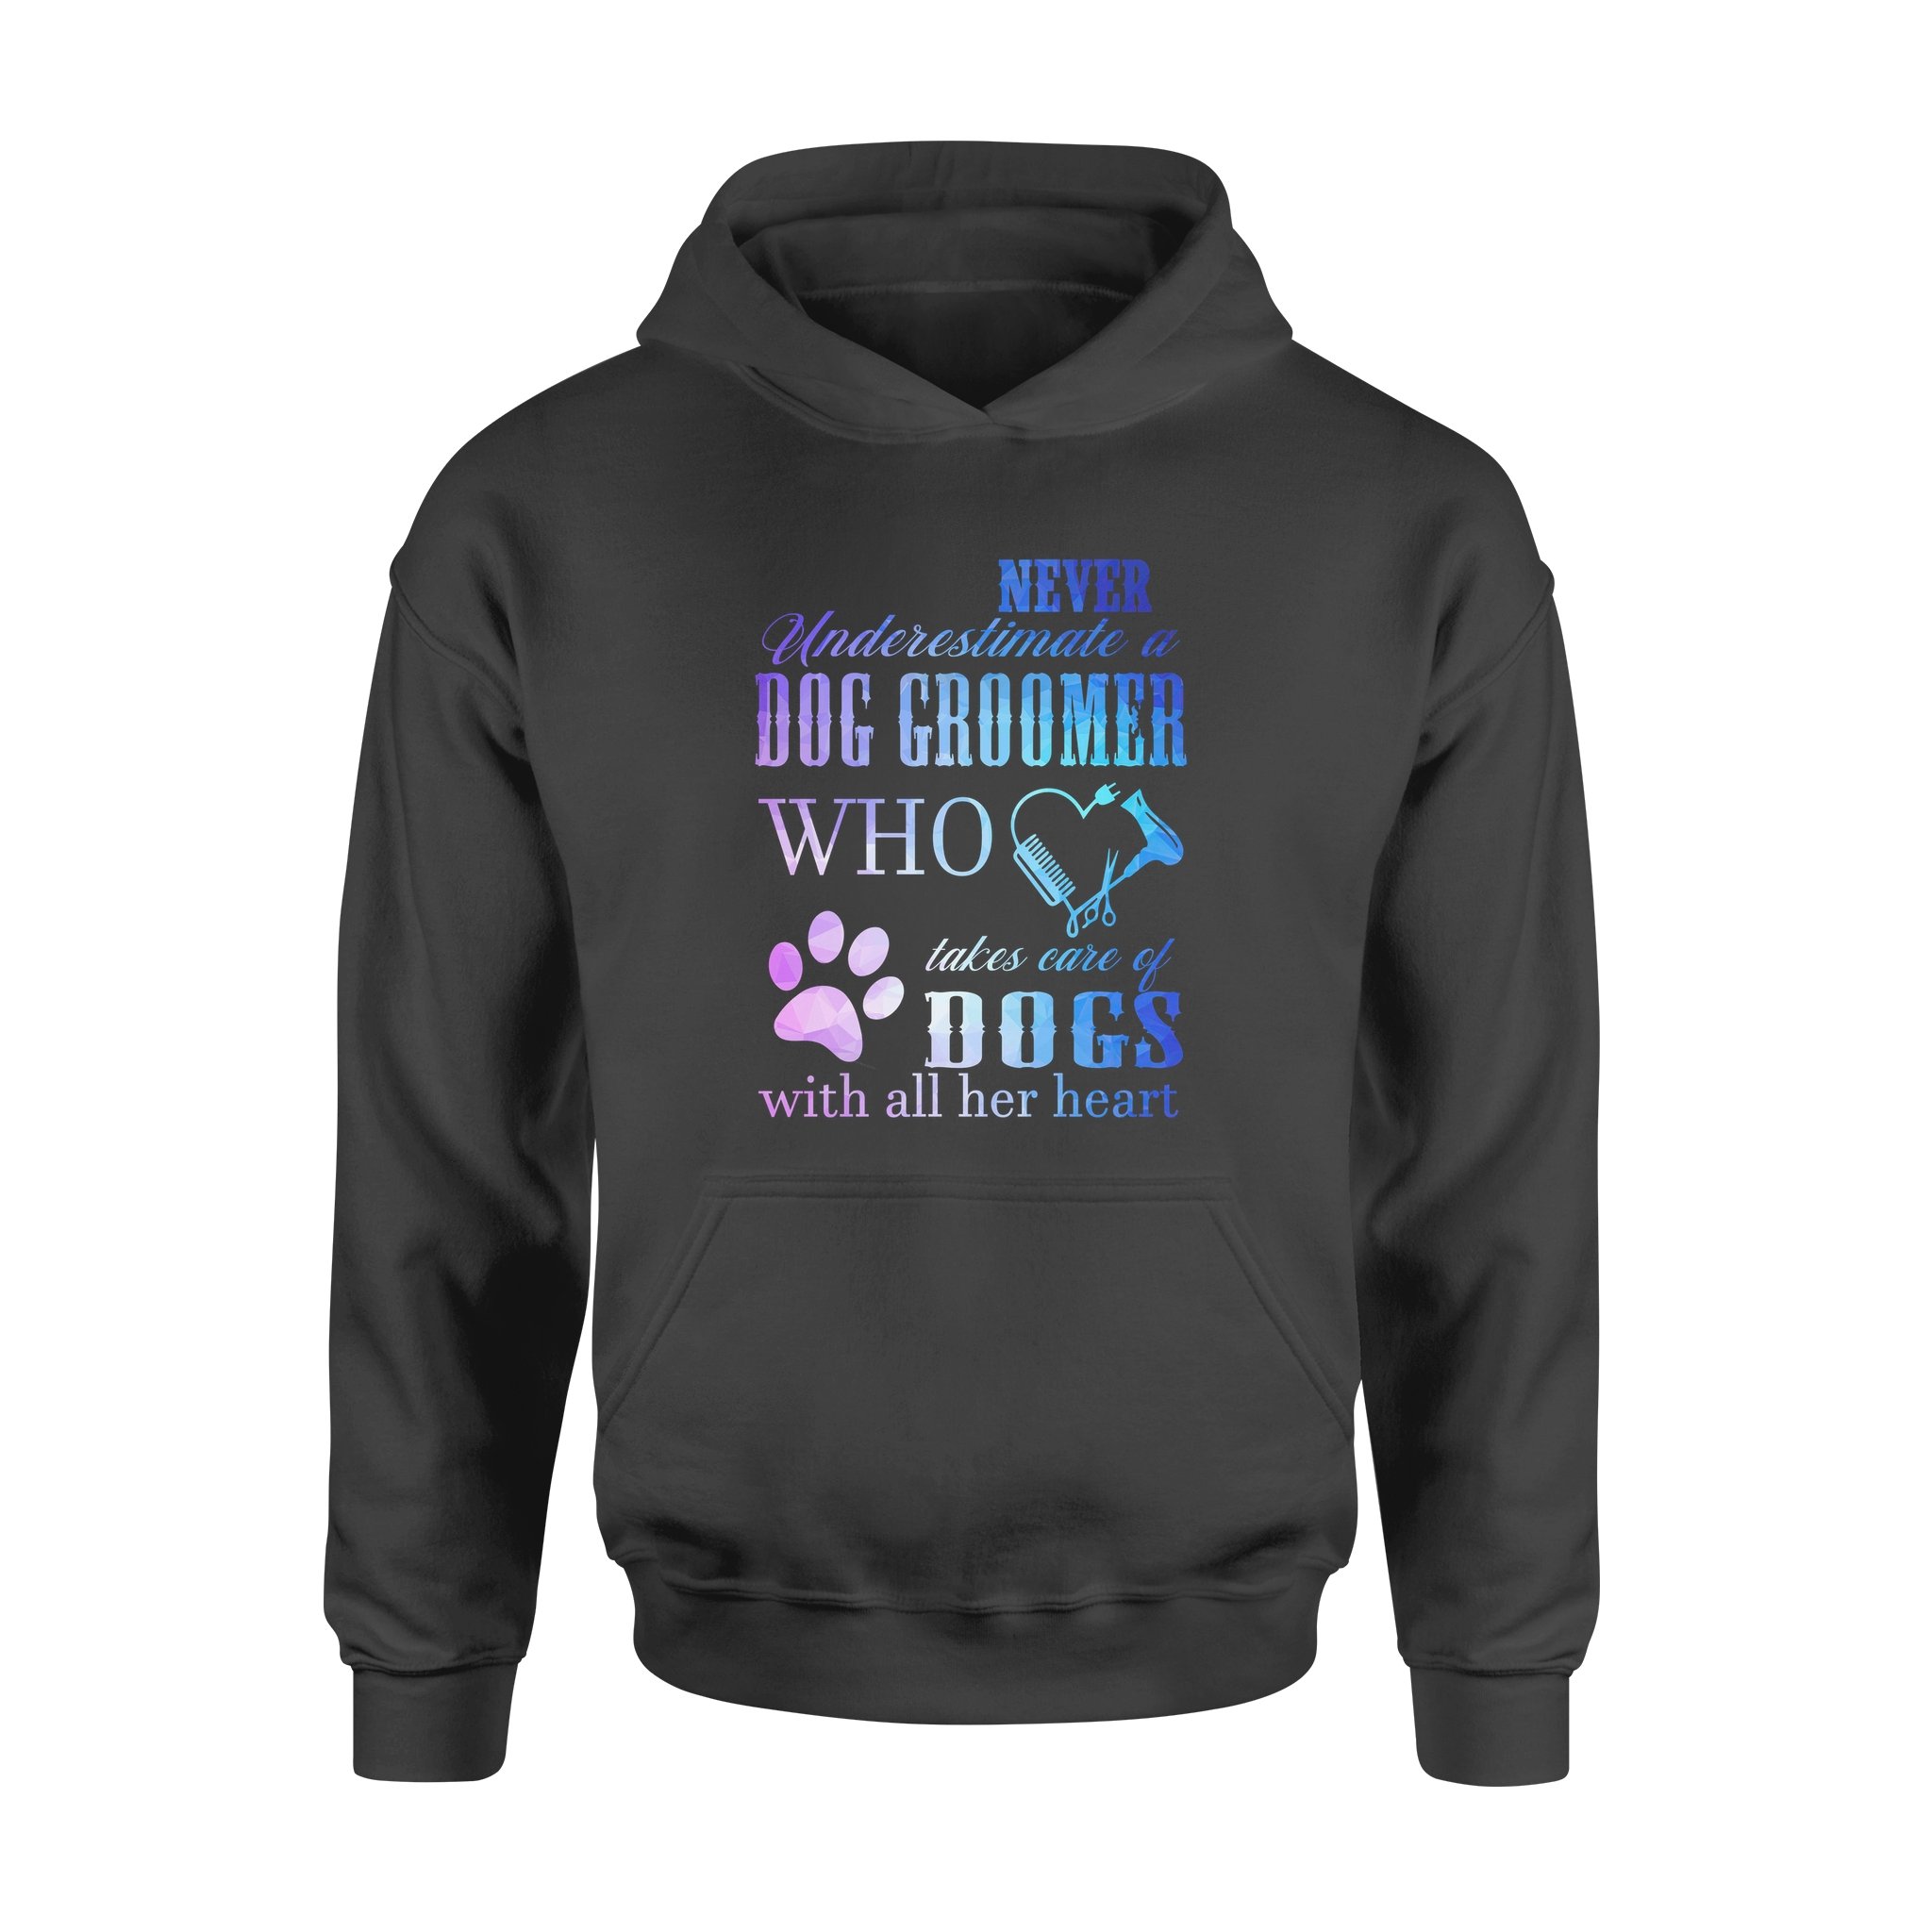 Never underestimate a dog groomer who takes care of dogs with all her heart – Standard Hoodie